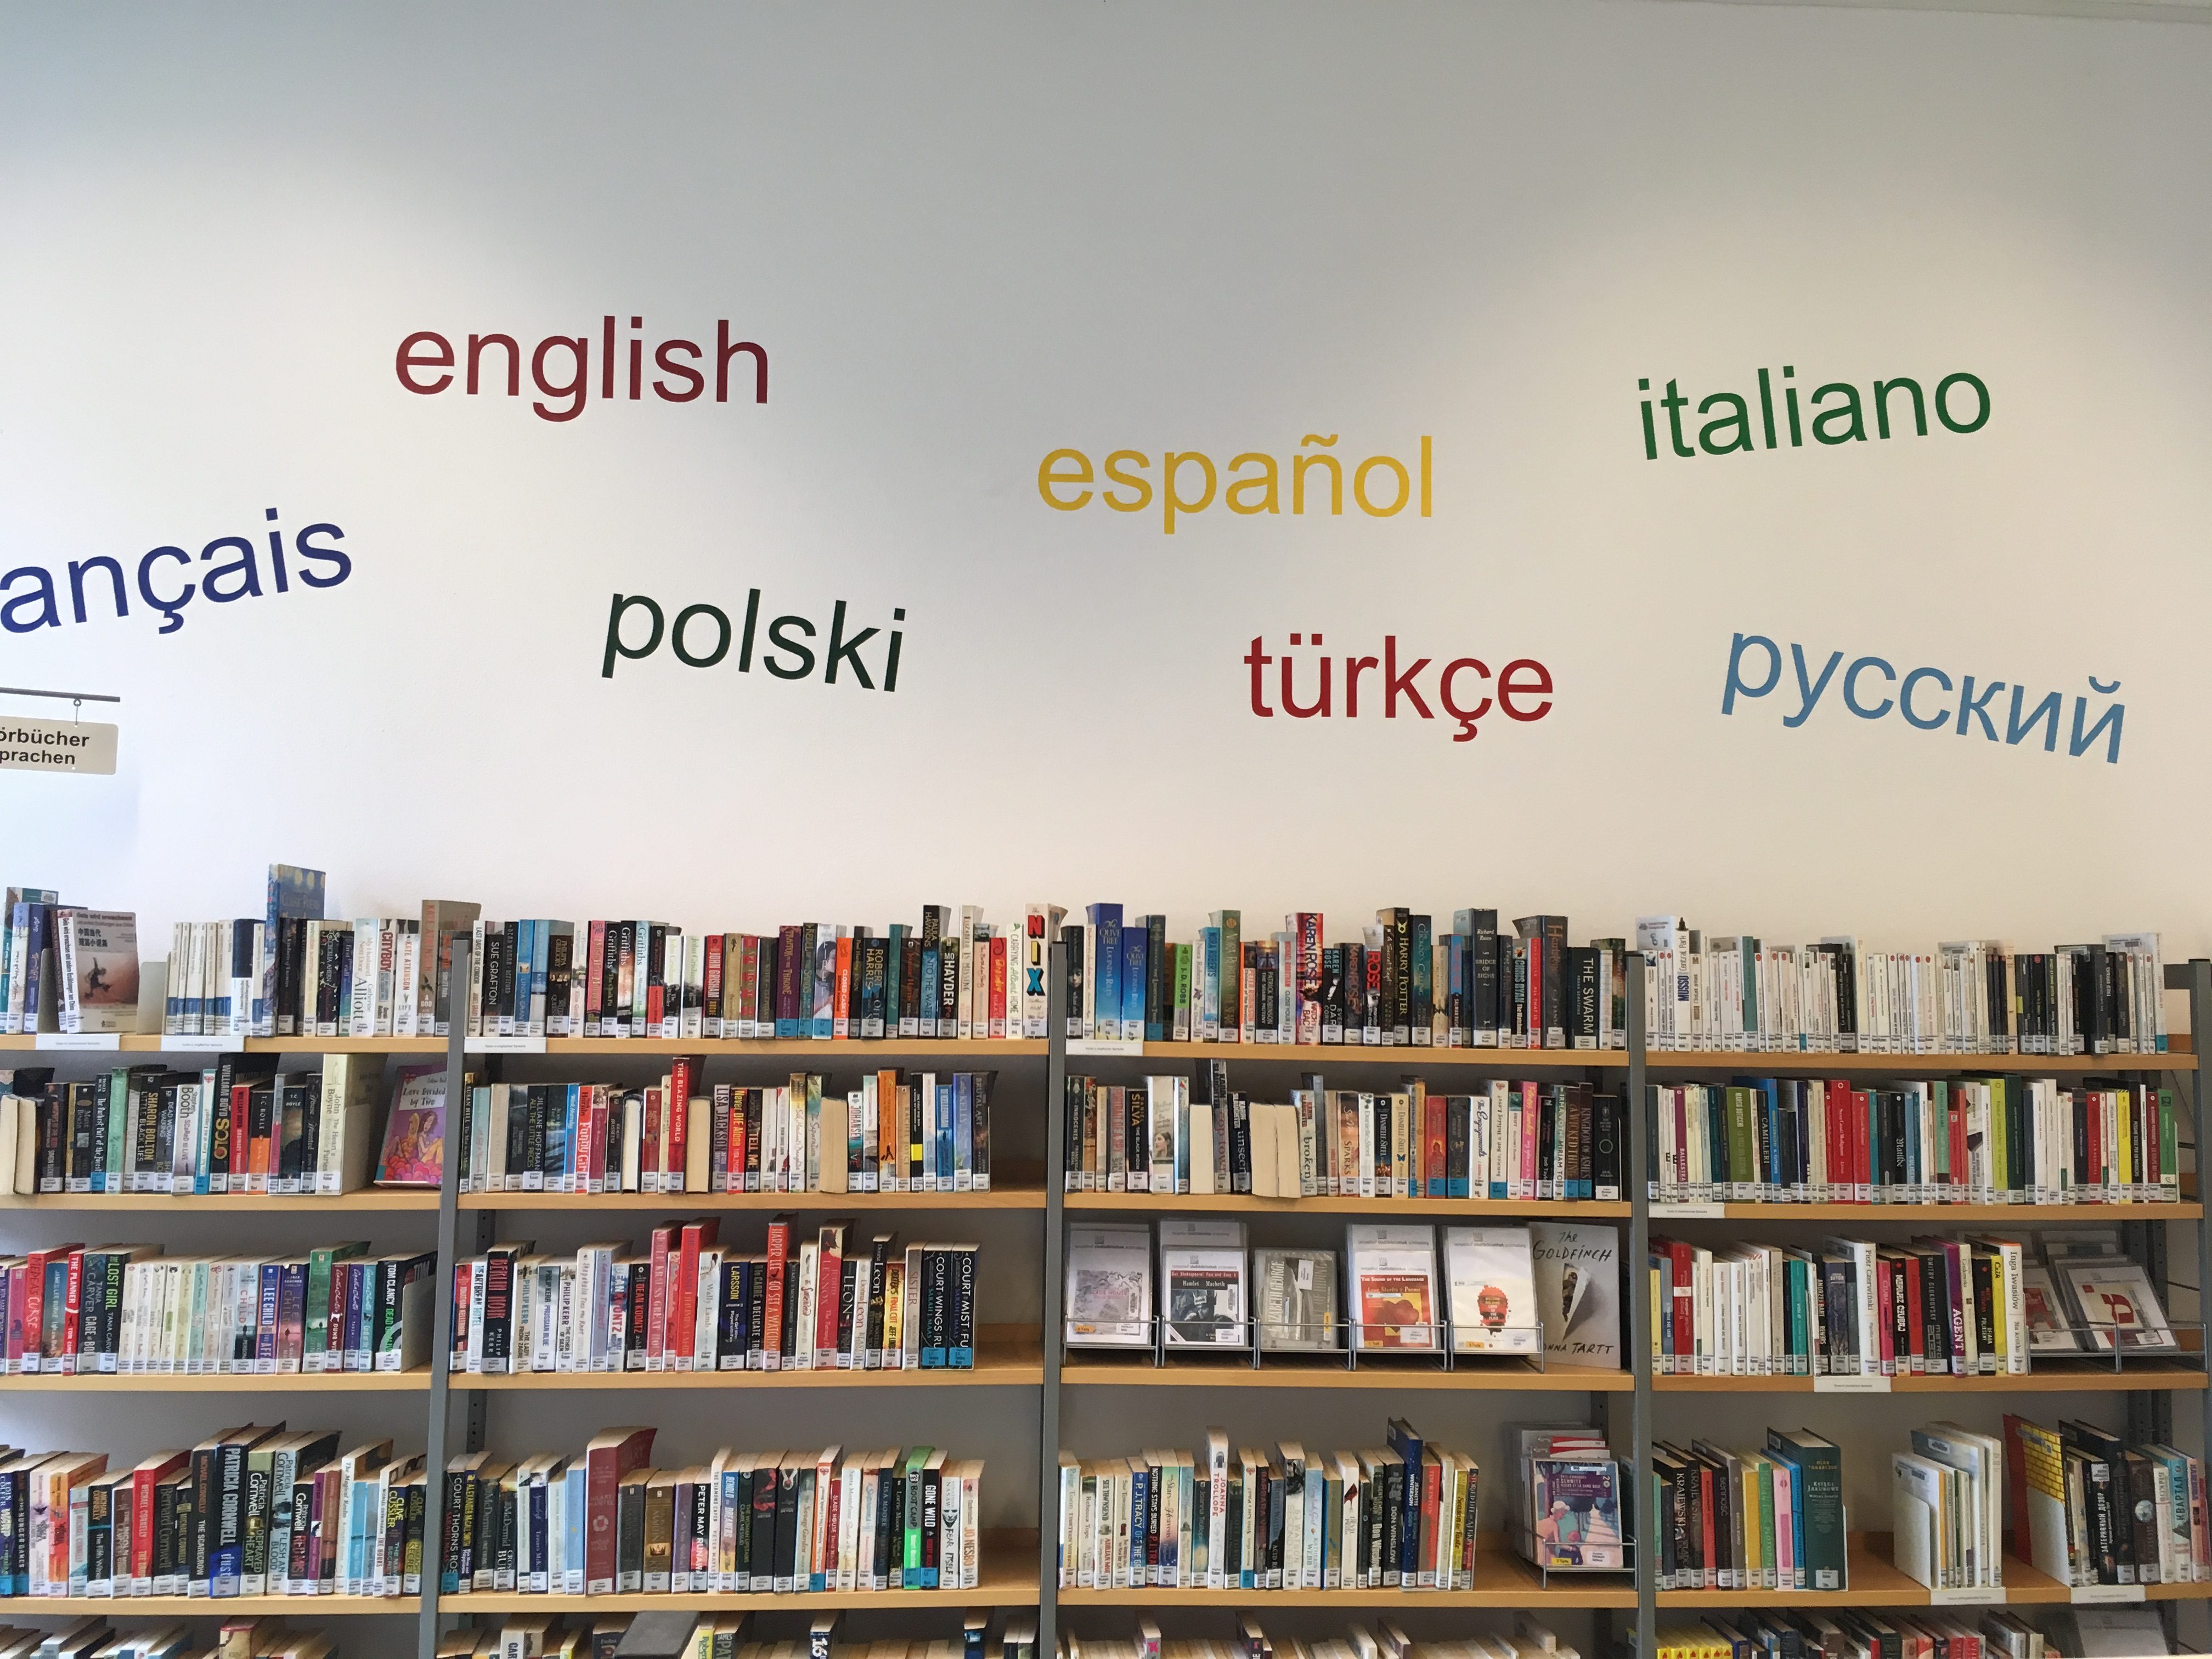 Shelves full of books in a library. The wall above has lettering reading "francais englisch polski espanol italiano..."